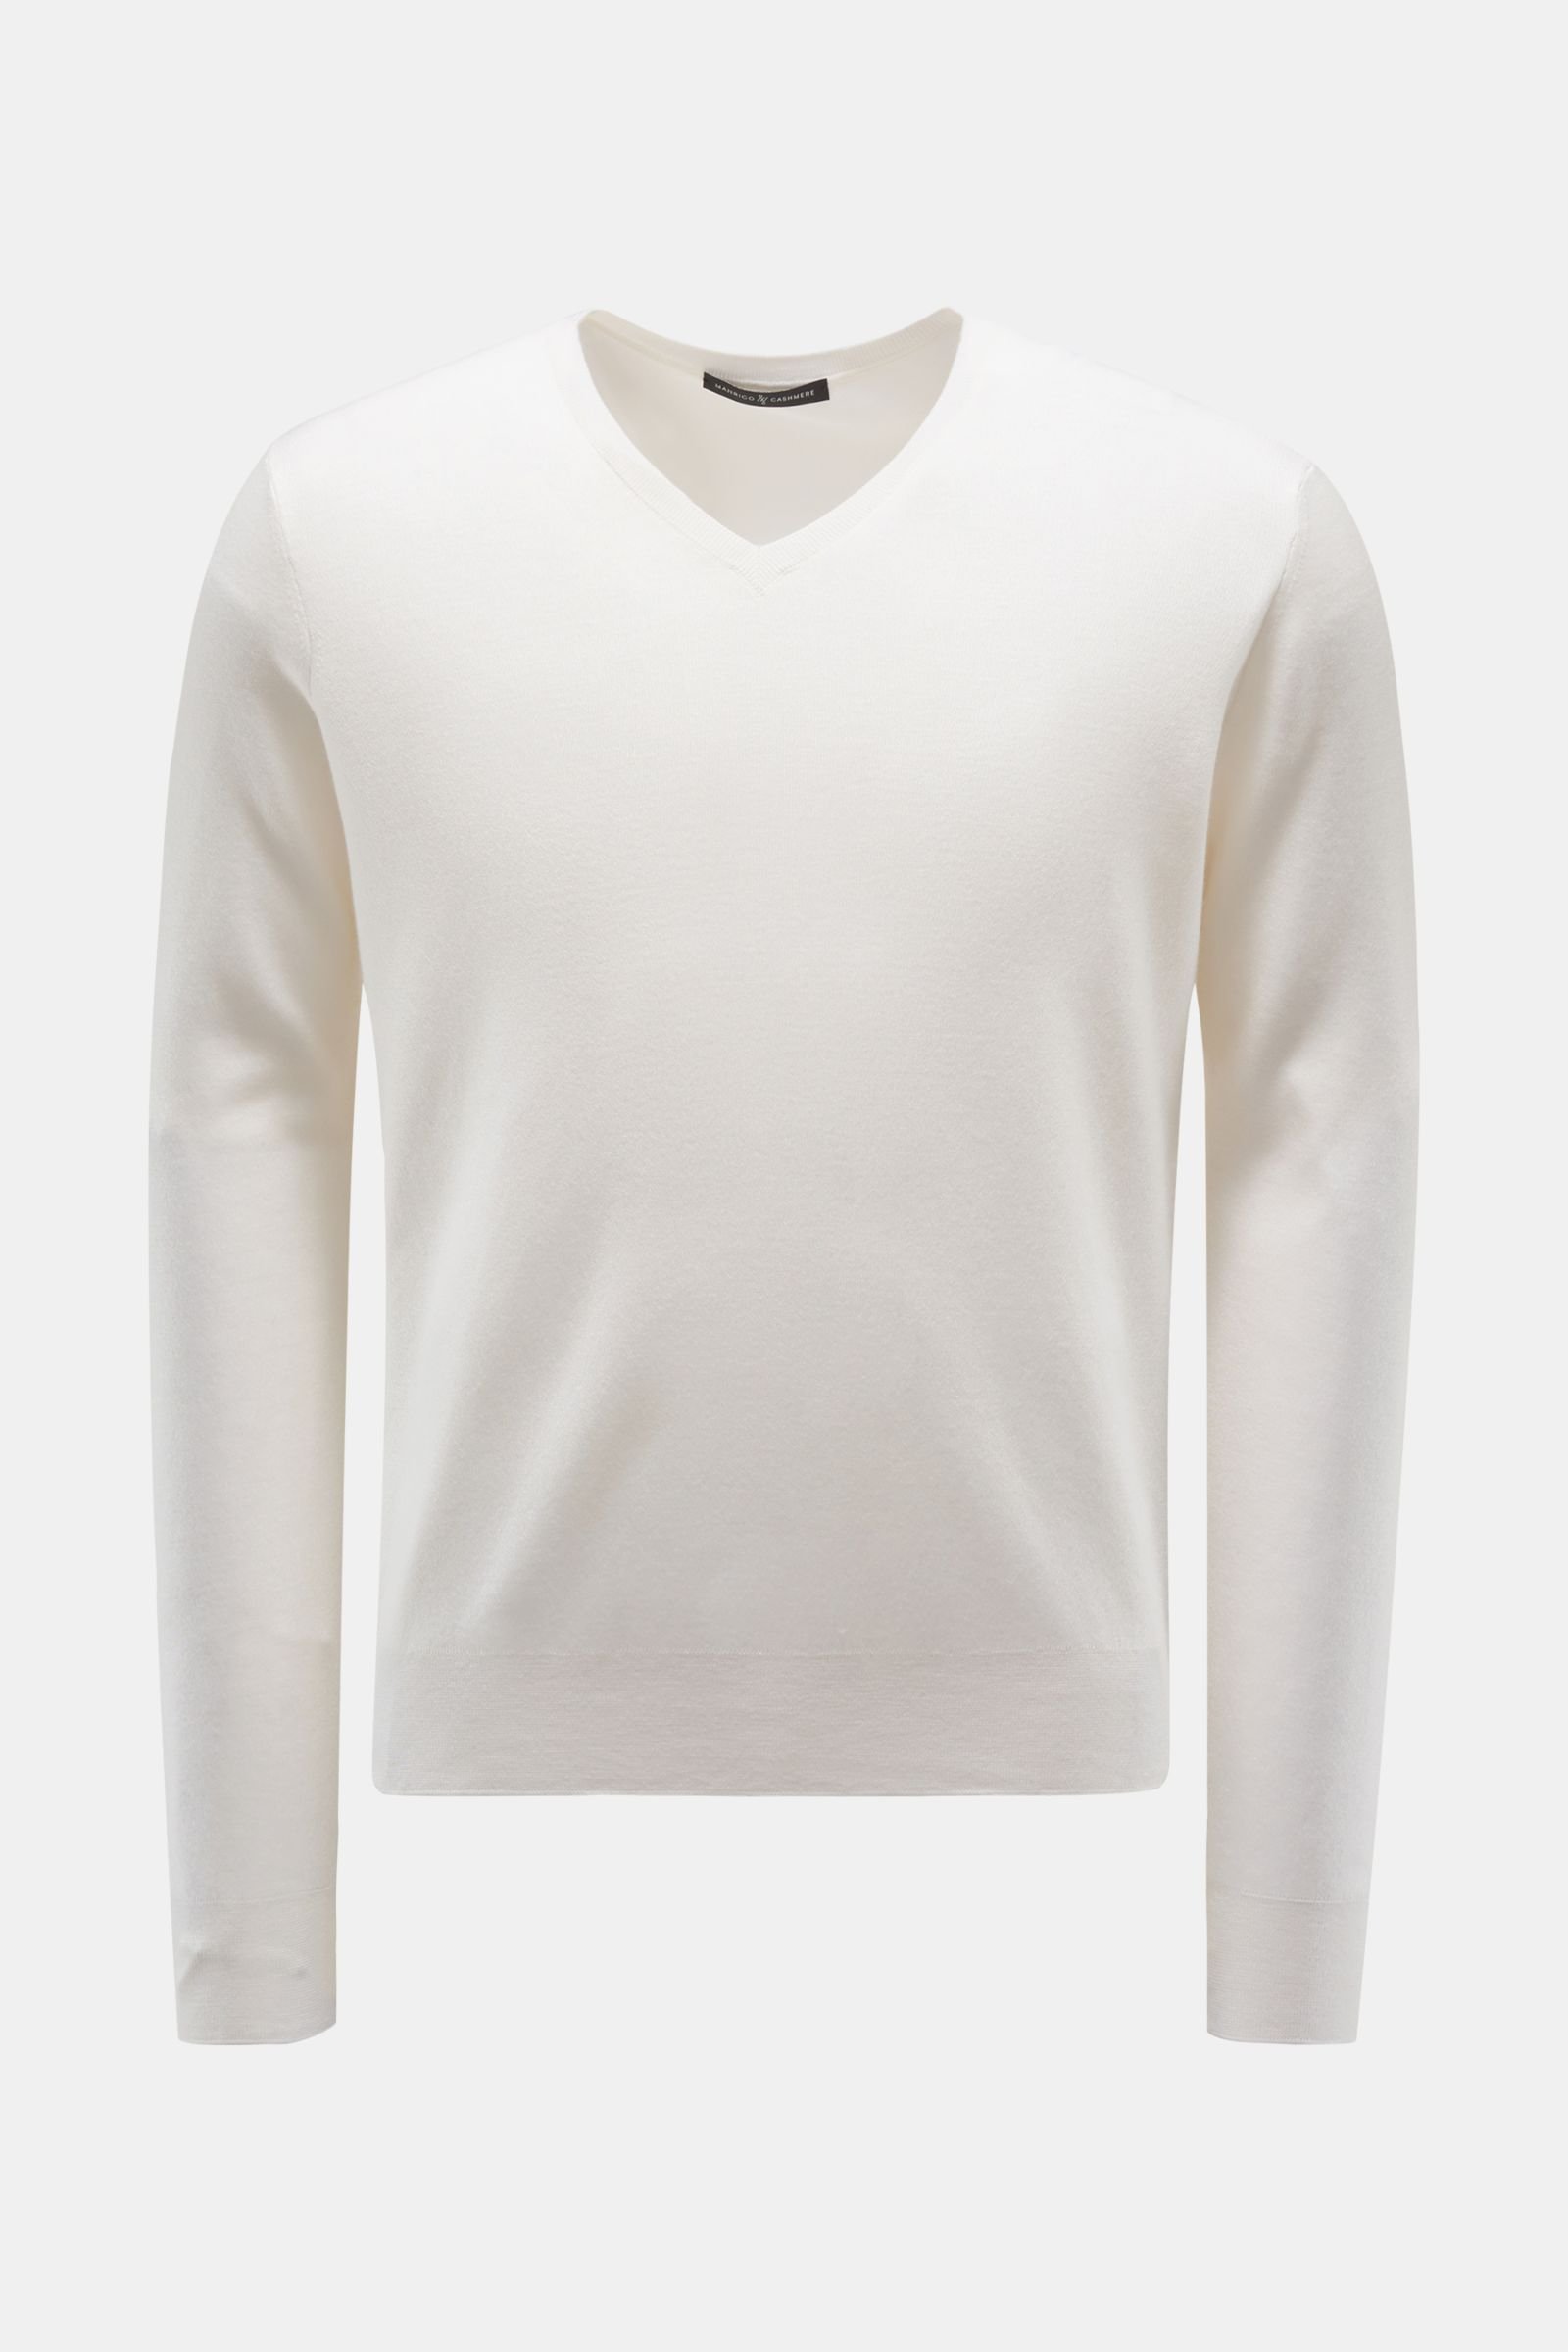 Cashmere Feinstrick-Pullover offwhite